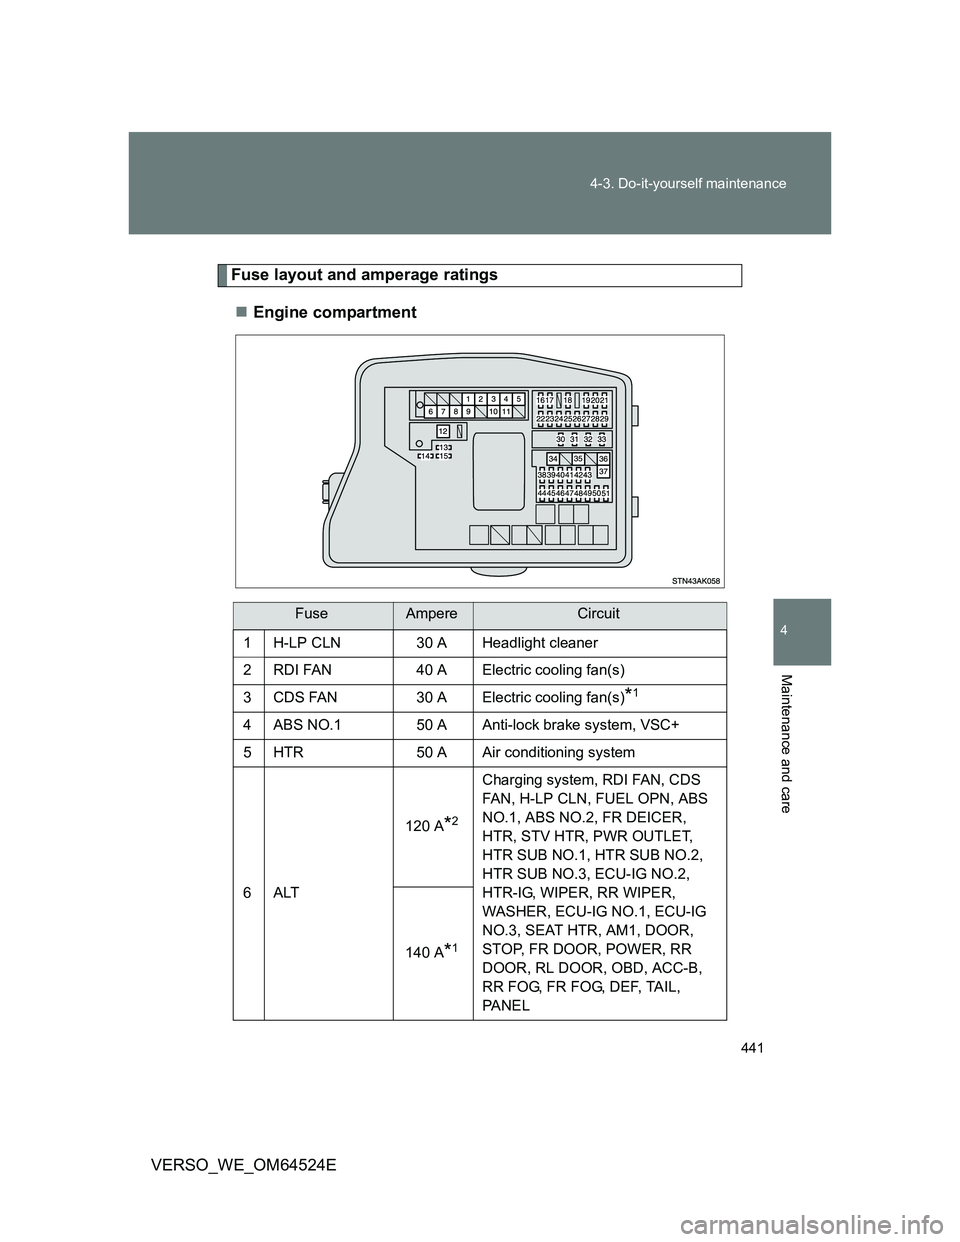 TOYOTA VERSO 2012  Owners Manual 441 4-3. Do-it-yourself maintenance
4
Maintenance and care
VERSO_WE_OM64524E
Fuse layout and amperage ratings
Engine compartment
FuseAmpereCircuit
1H-LP CLN30 A Headlight cleaner
2RDI FAN40 A Elect